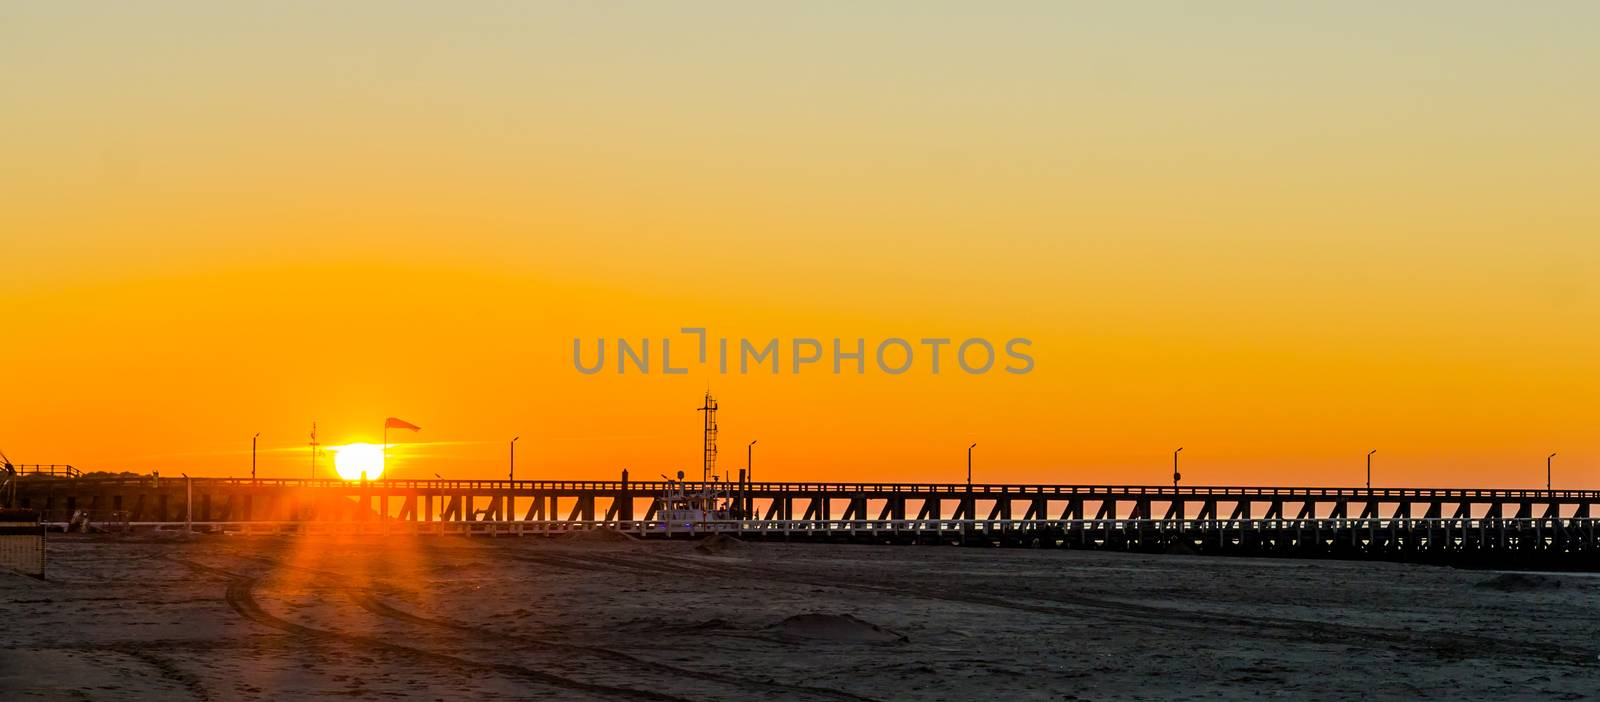 long pier at sunset on the beach of Blankenberge, Belgium, sunset with a colorful sky